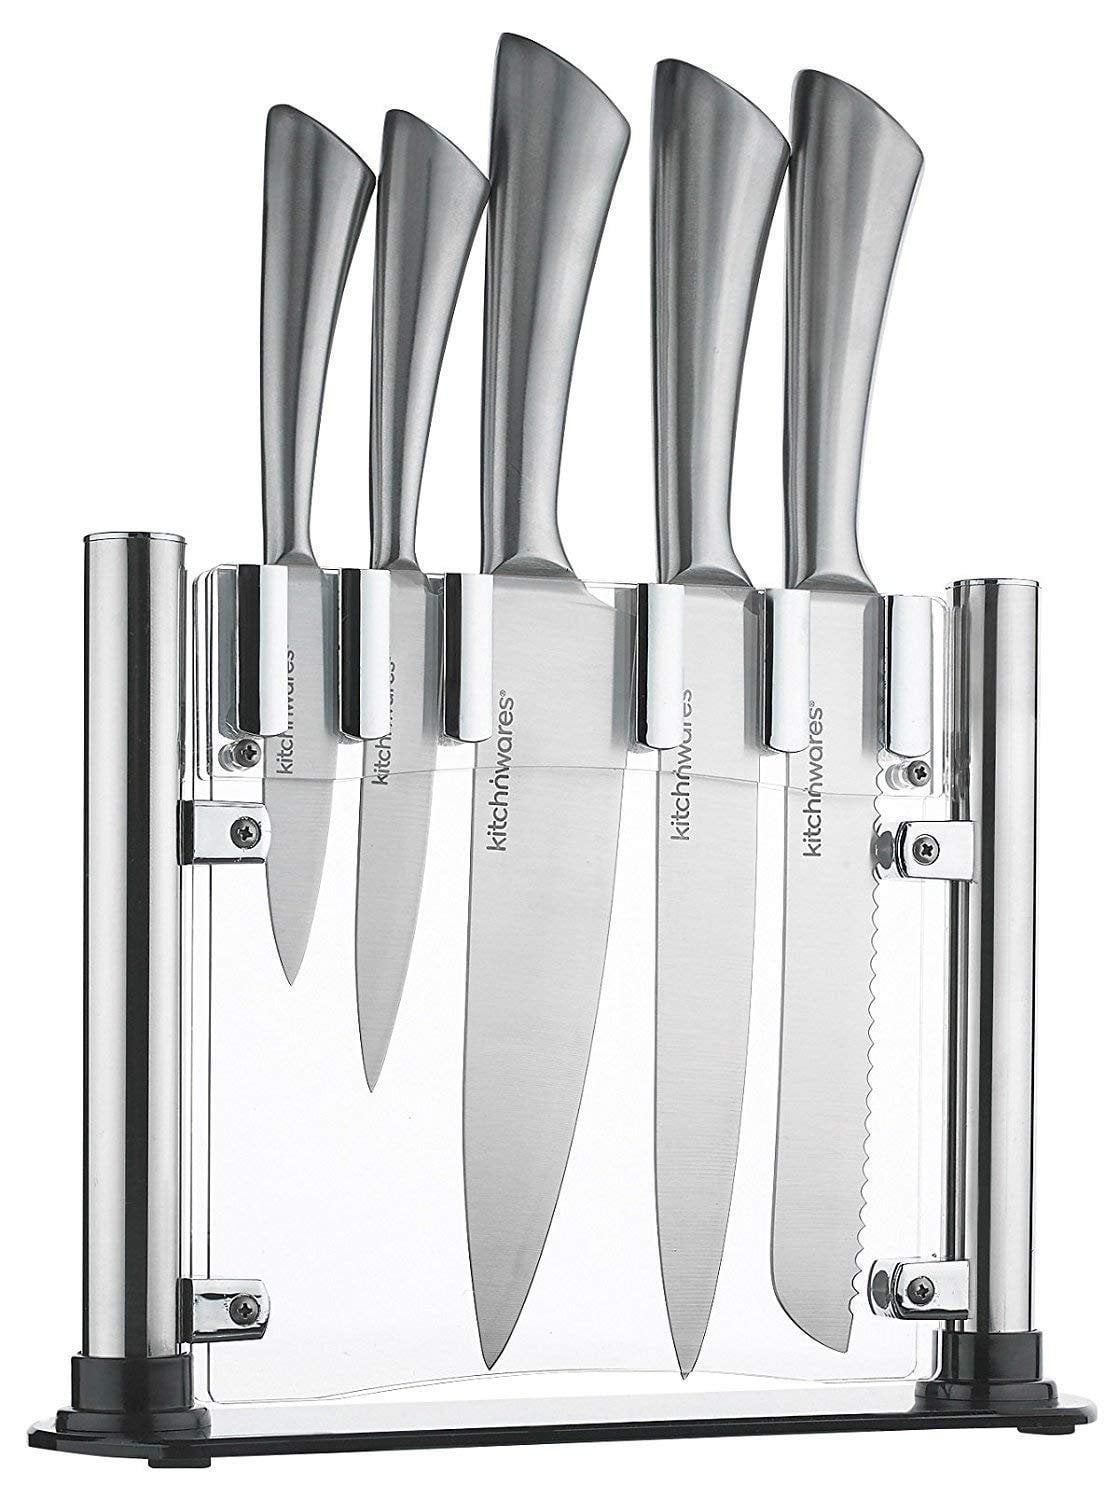 Berlinger Haus 6 Piece Kitchen Knife Set, Elegant Cooking Knives w/ Kitchen  Shears and Sharpener, Stainless Steel w/ Acrylic Stand, Aspen Collection